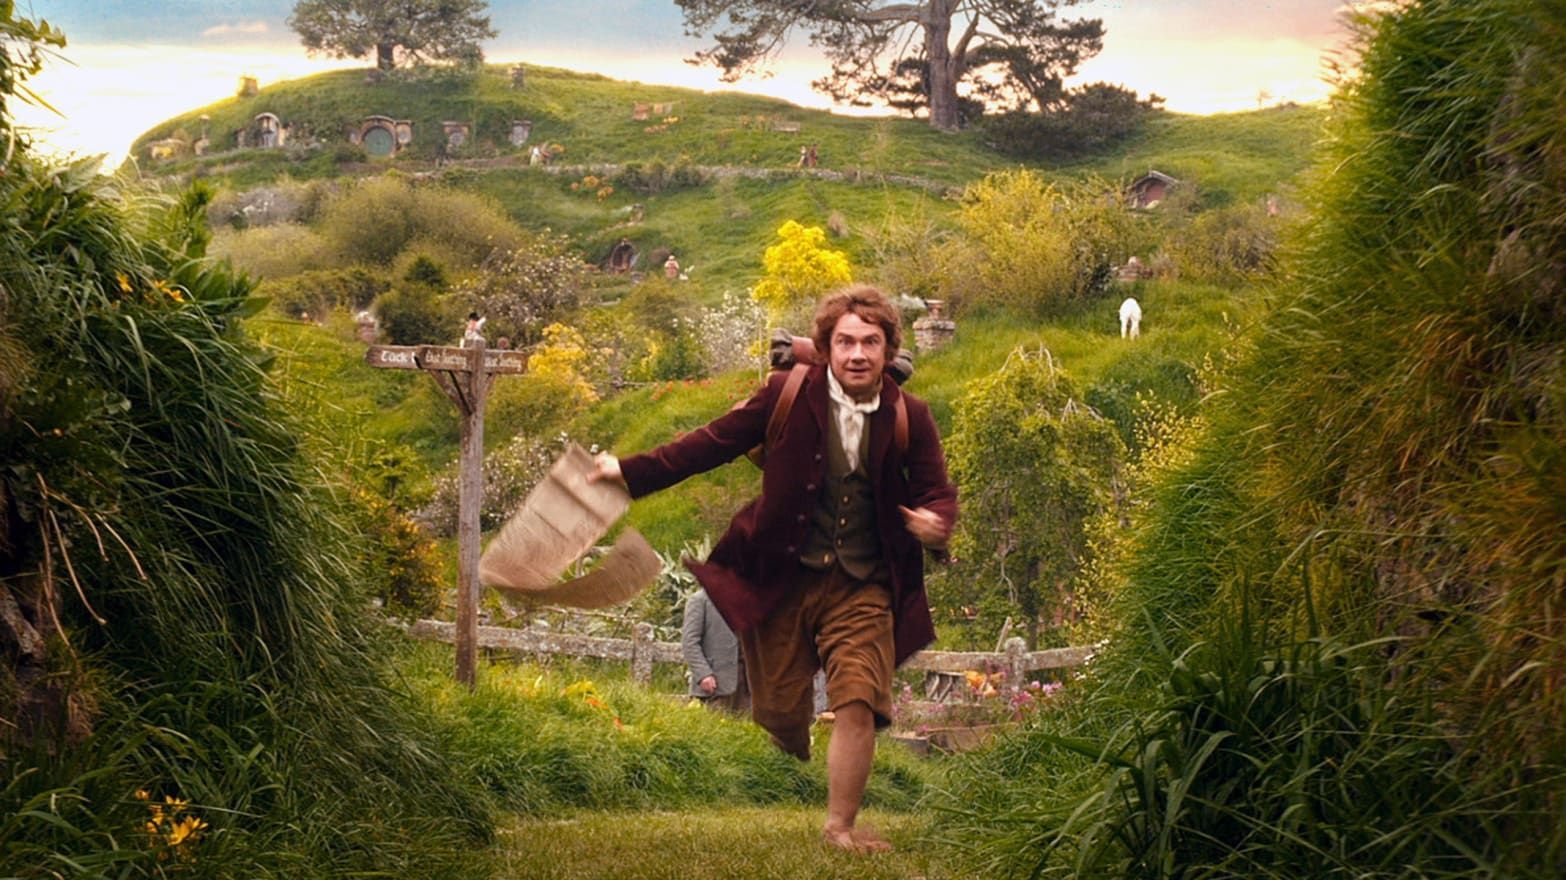 Bilbo Baggins leaves for his adventure. Will you?